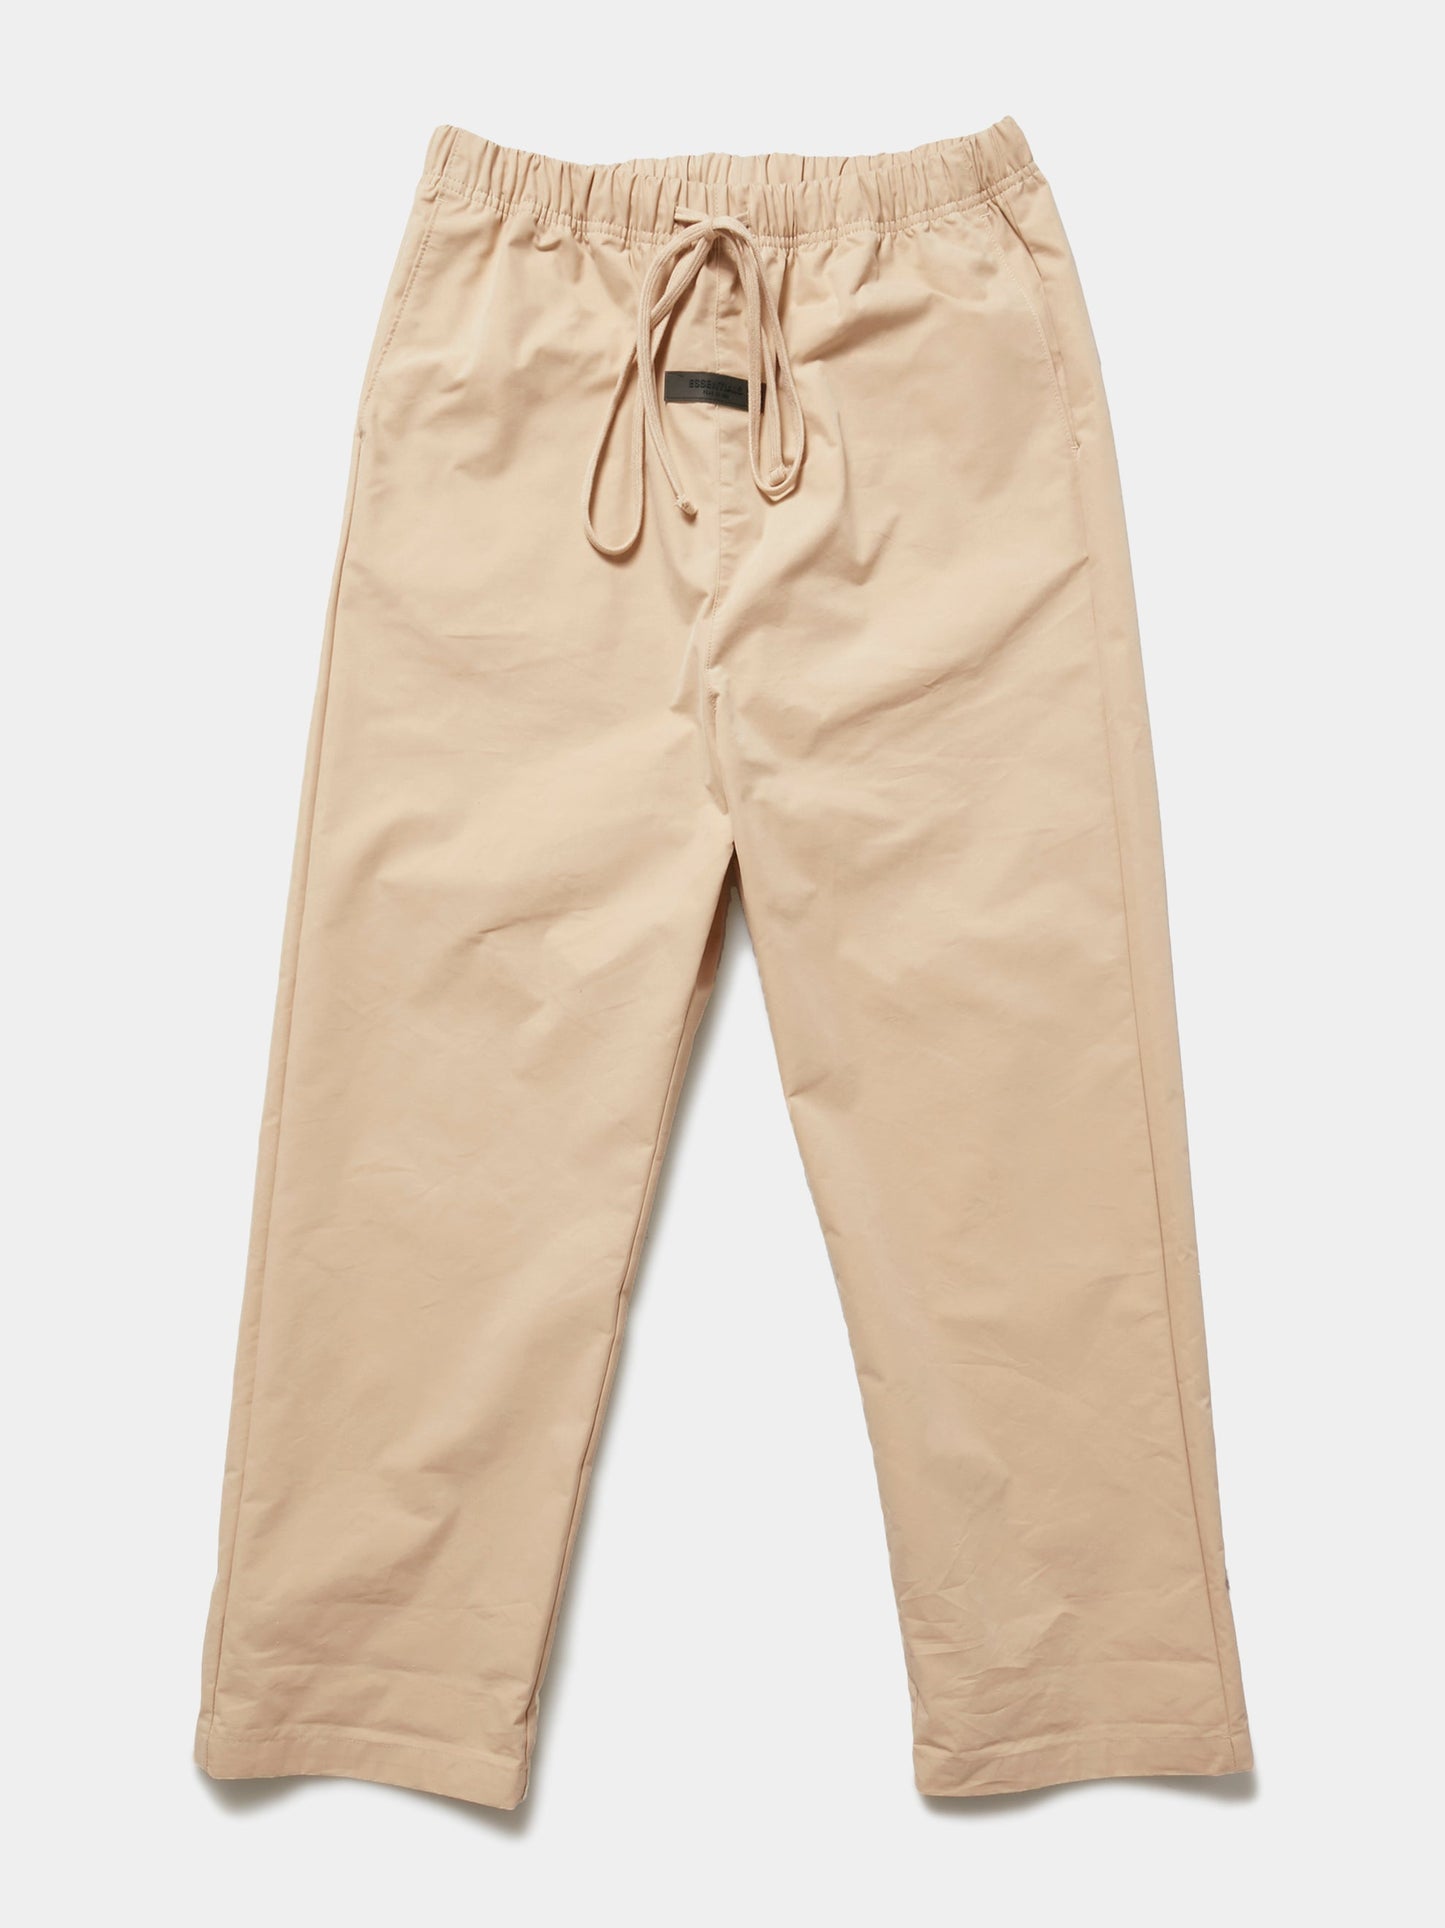 Relaxed Trouser (Sand)